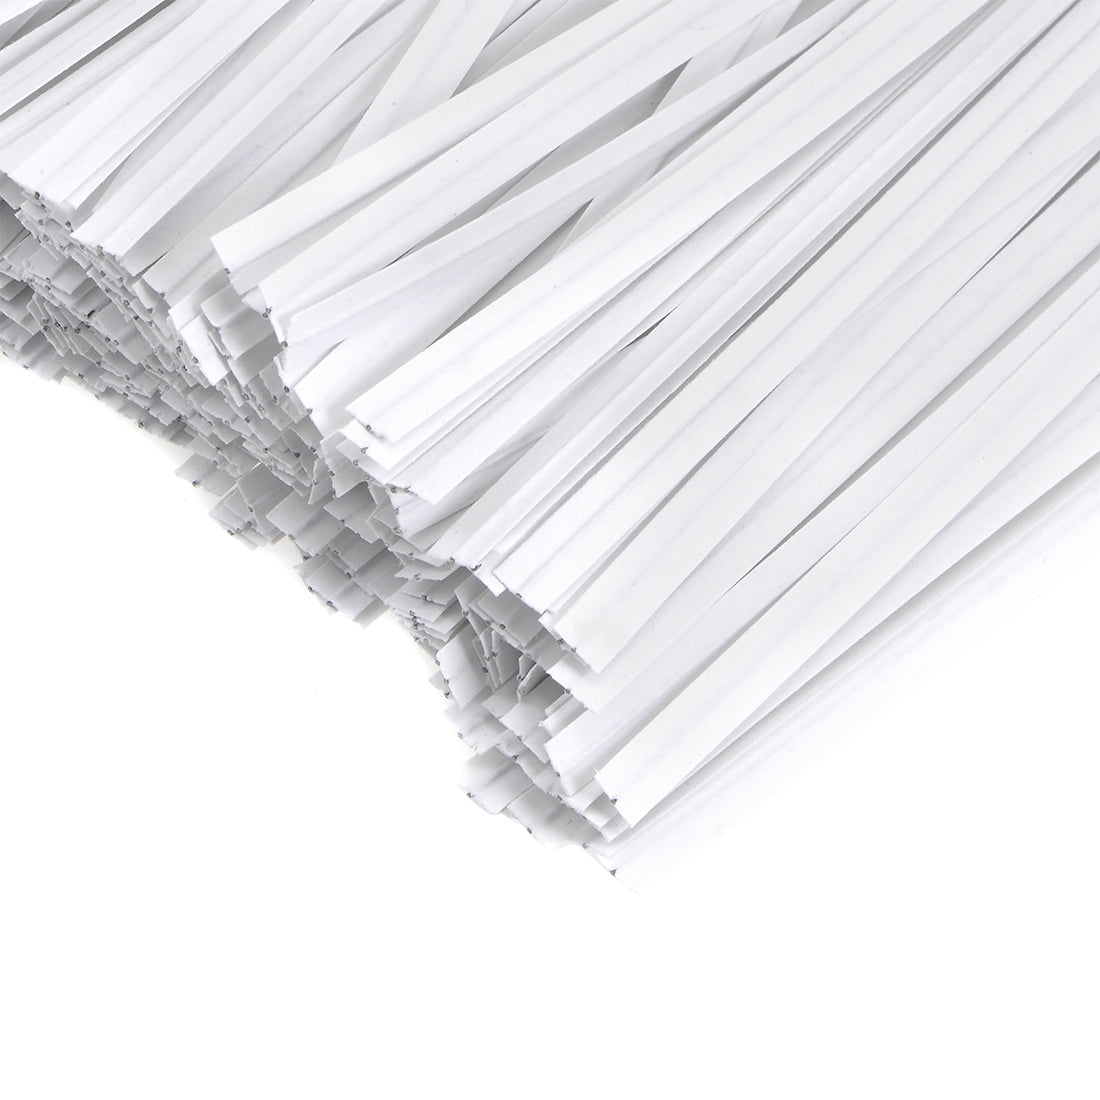 uxcell Uxcell Long Strong Paper Twist Ties 4 Inches Quality Tie for Tying Gift Bags Art Craft Ties Manage Cords White 200pcs